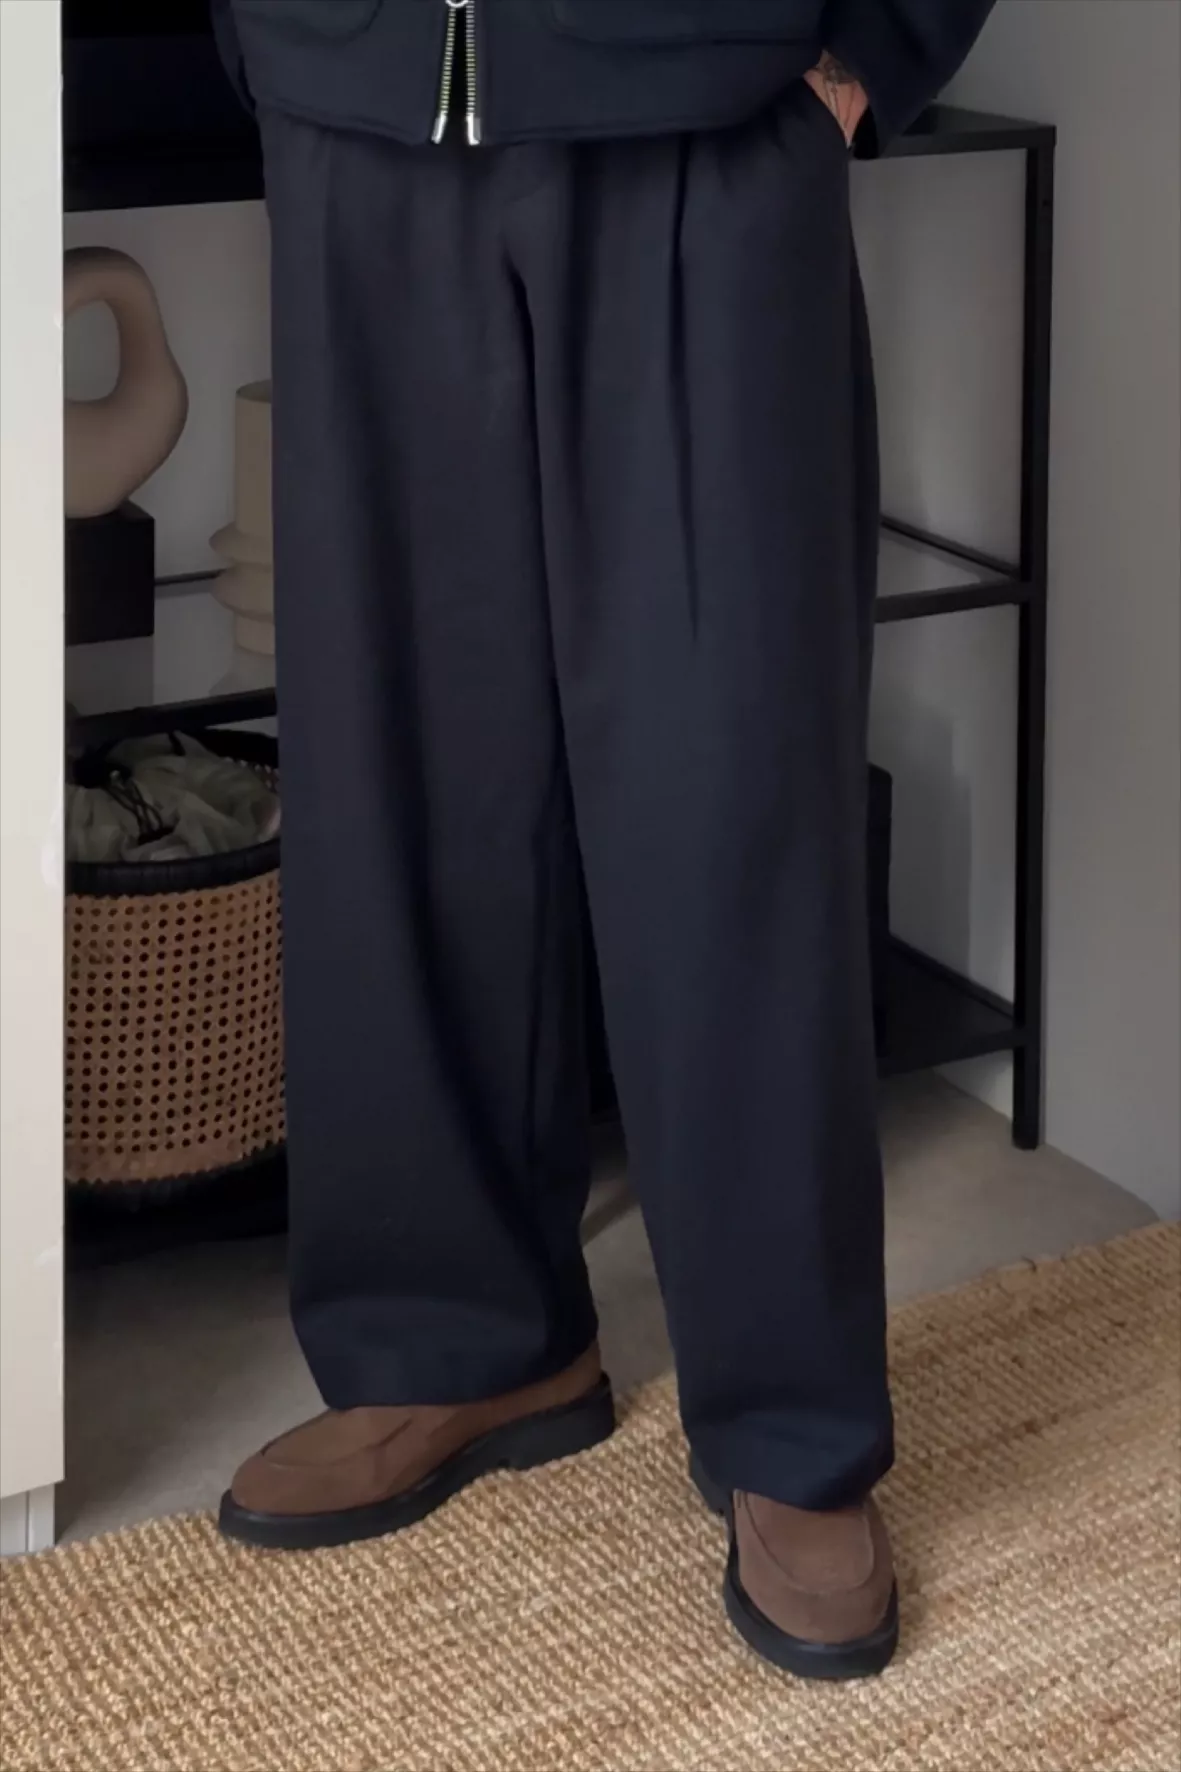 Weekday Uno Wide Leg Trousers in Blue for Men